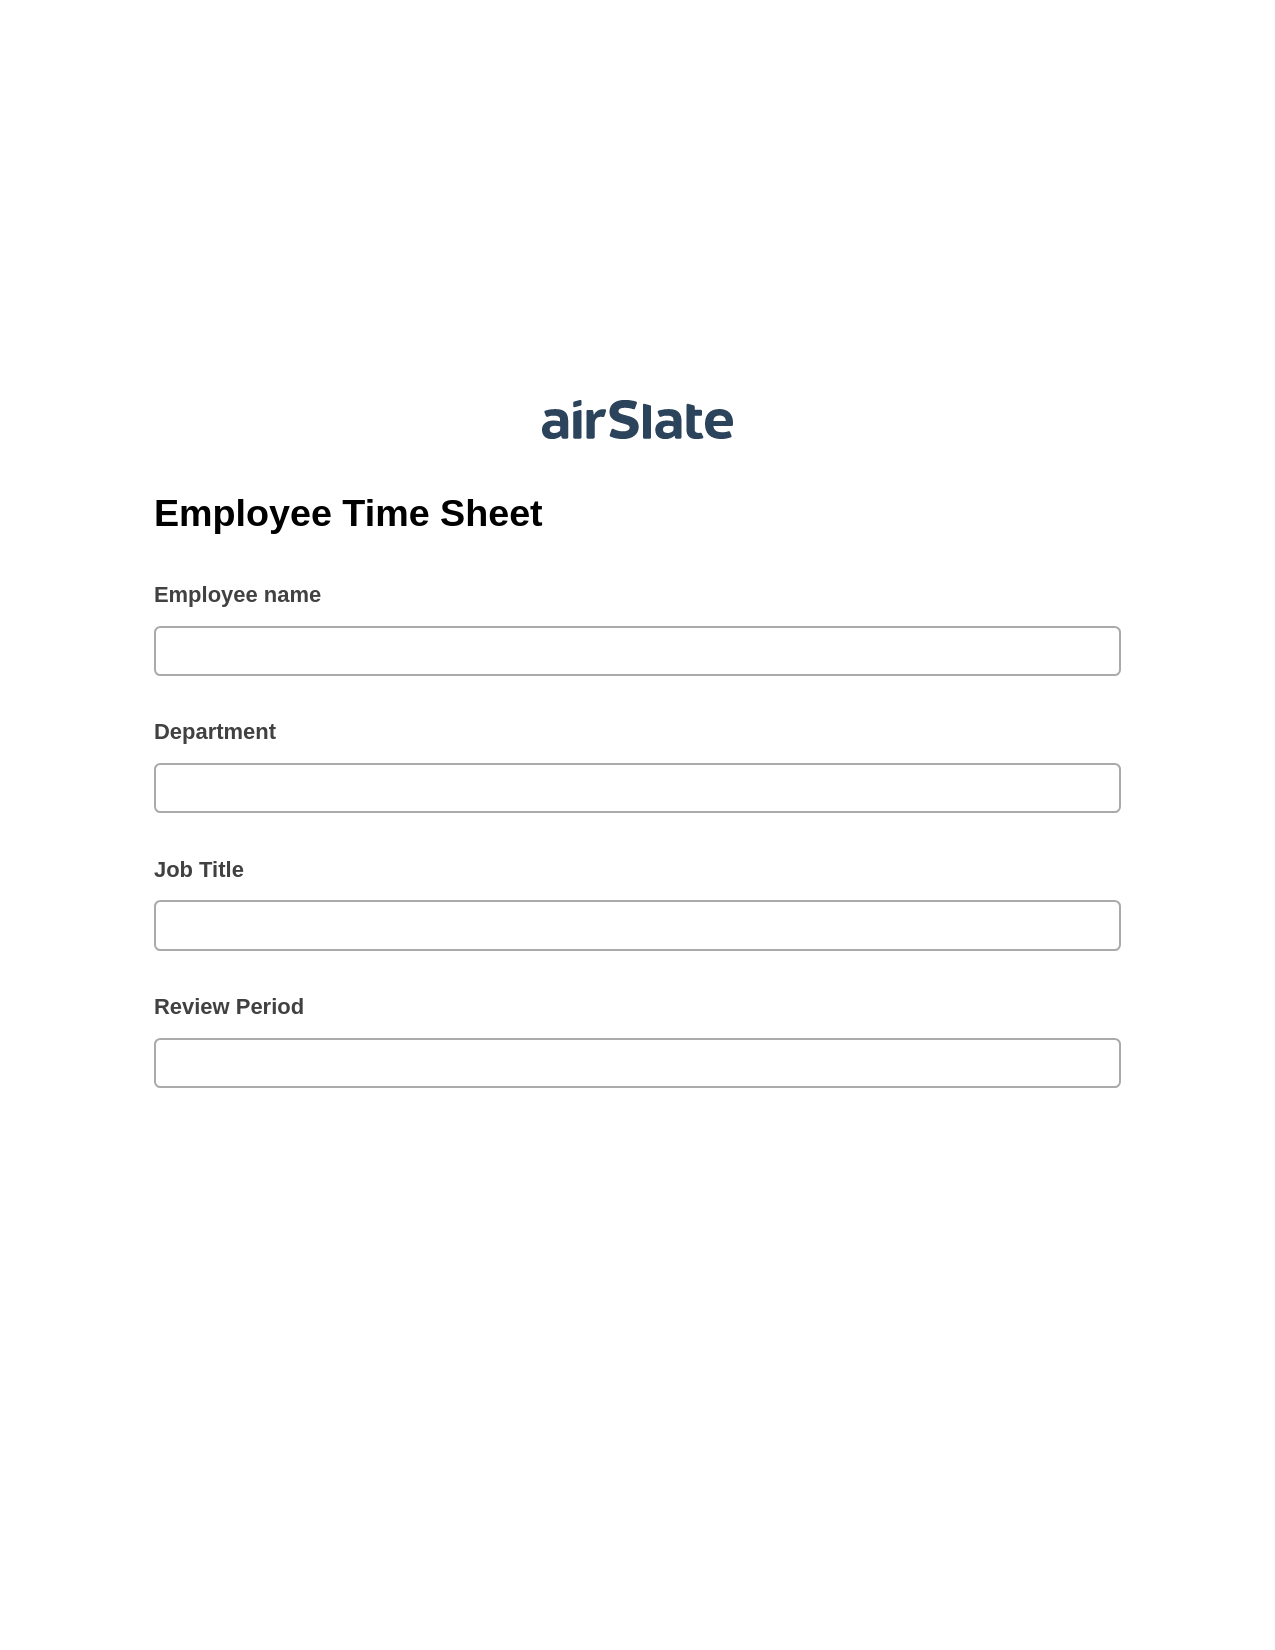 Multirole Employee Time Sheet Pre-fill Dropdowns from Airtable, Update MS Dynamics 365 Record Bot, Export to Google Sheet Bot